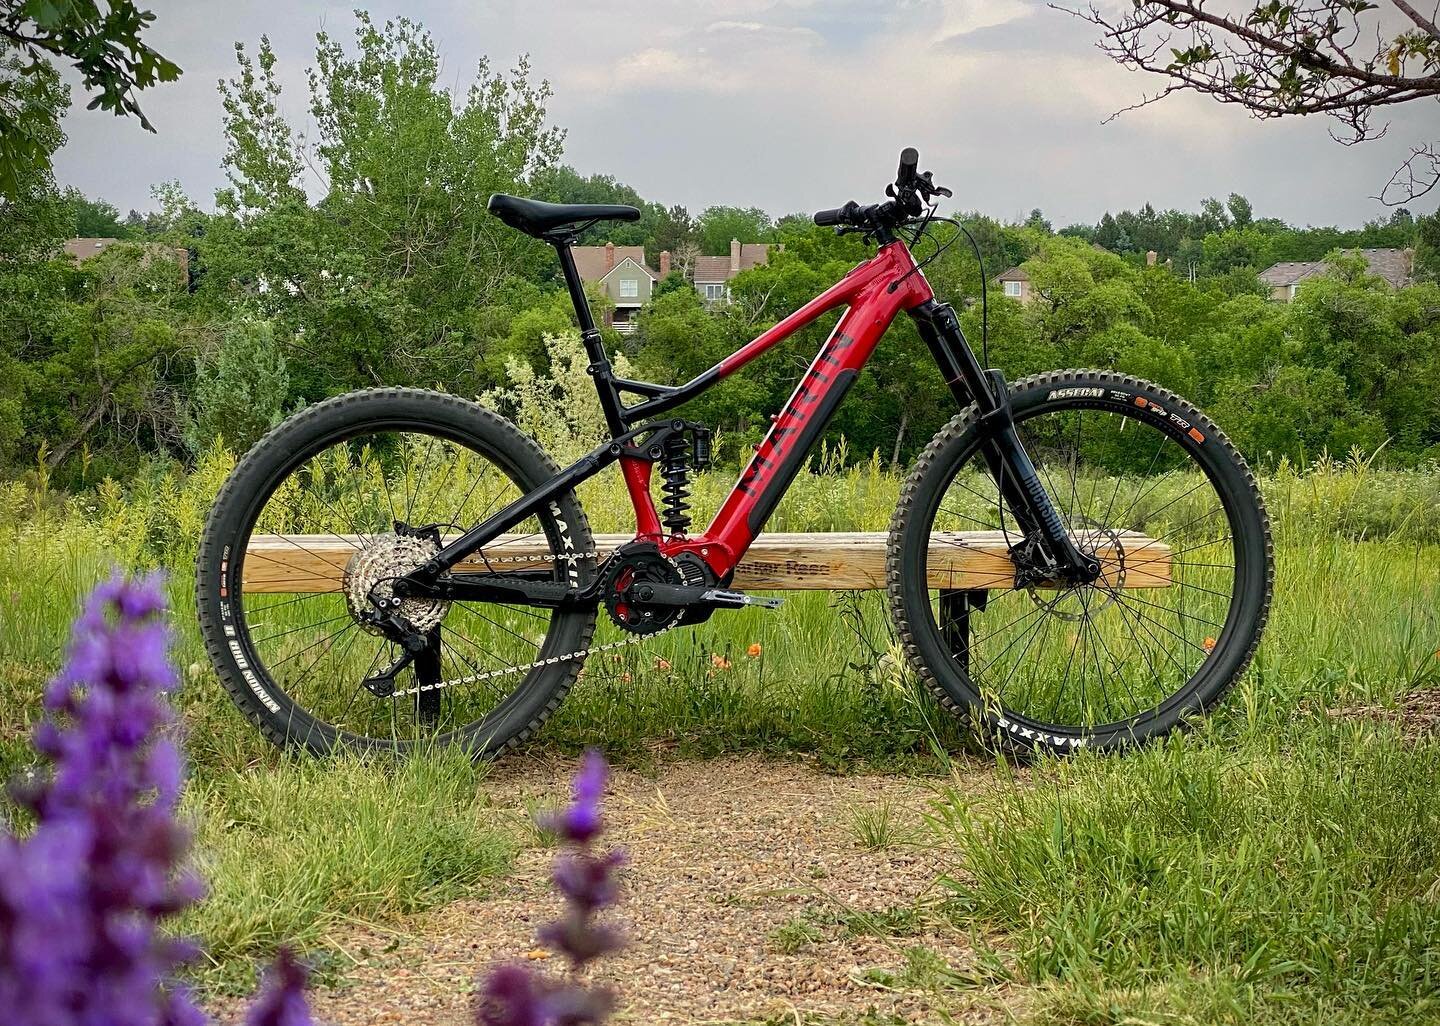 A hot button topic, but what are your feelings on eBikes and have they changed over time? Have you tried one yet? If not, why?

@marinbikes #emtb #ebike #ebikes #enduro #enduromtb #mountainbike #mtb #mtblife #mtblifestyle #cycling #bike #bikelife